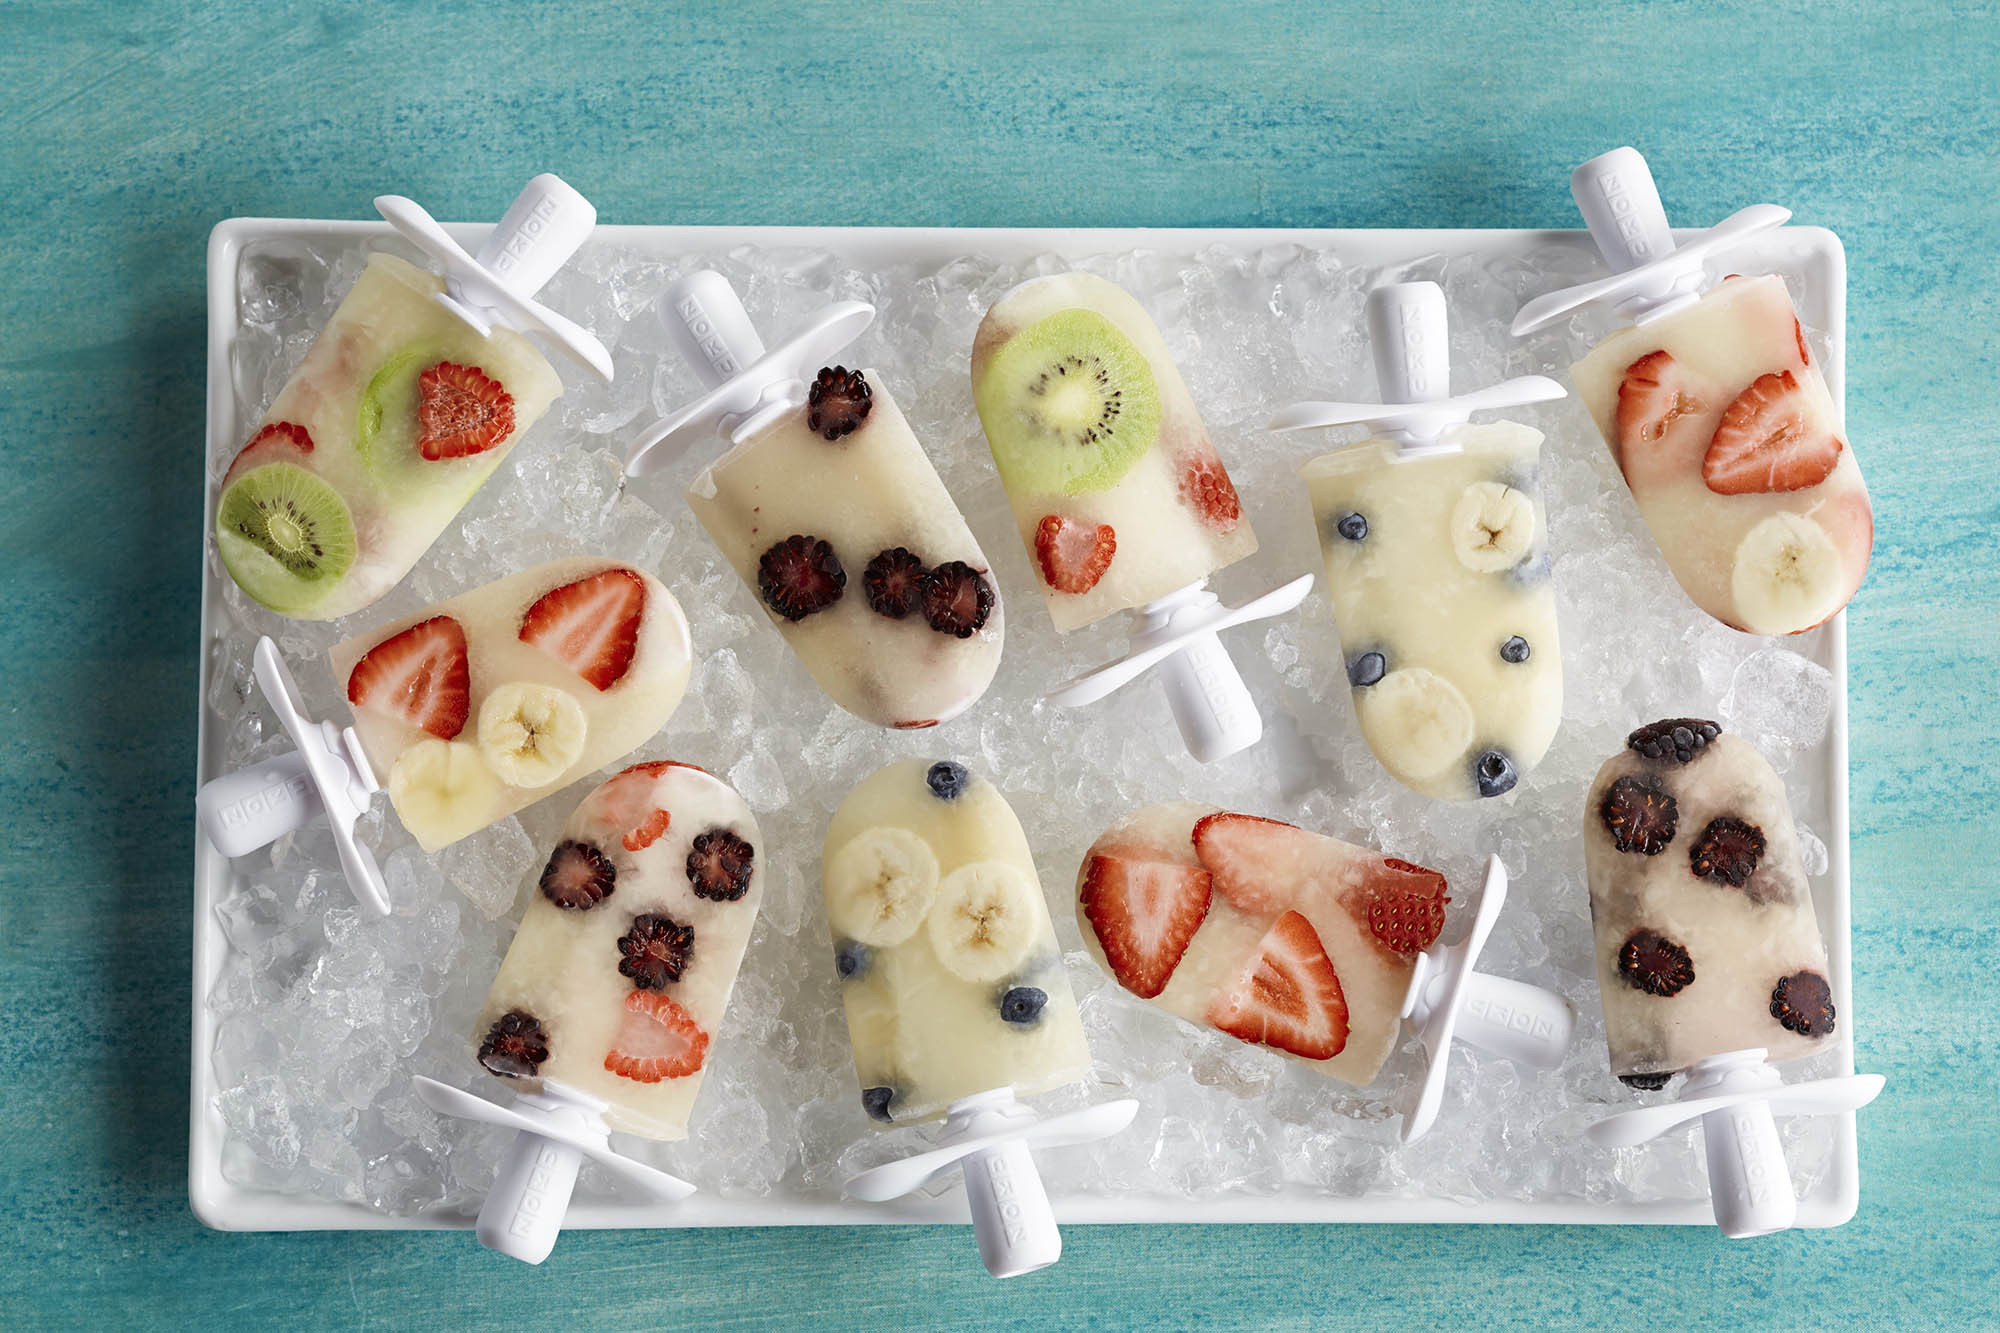 Mixed Fruit Popsicles